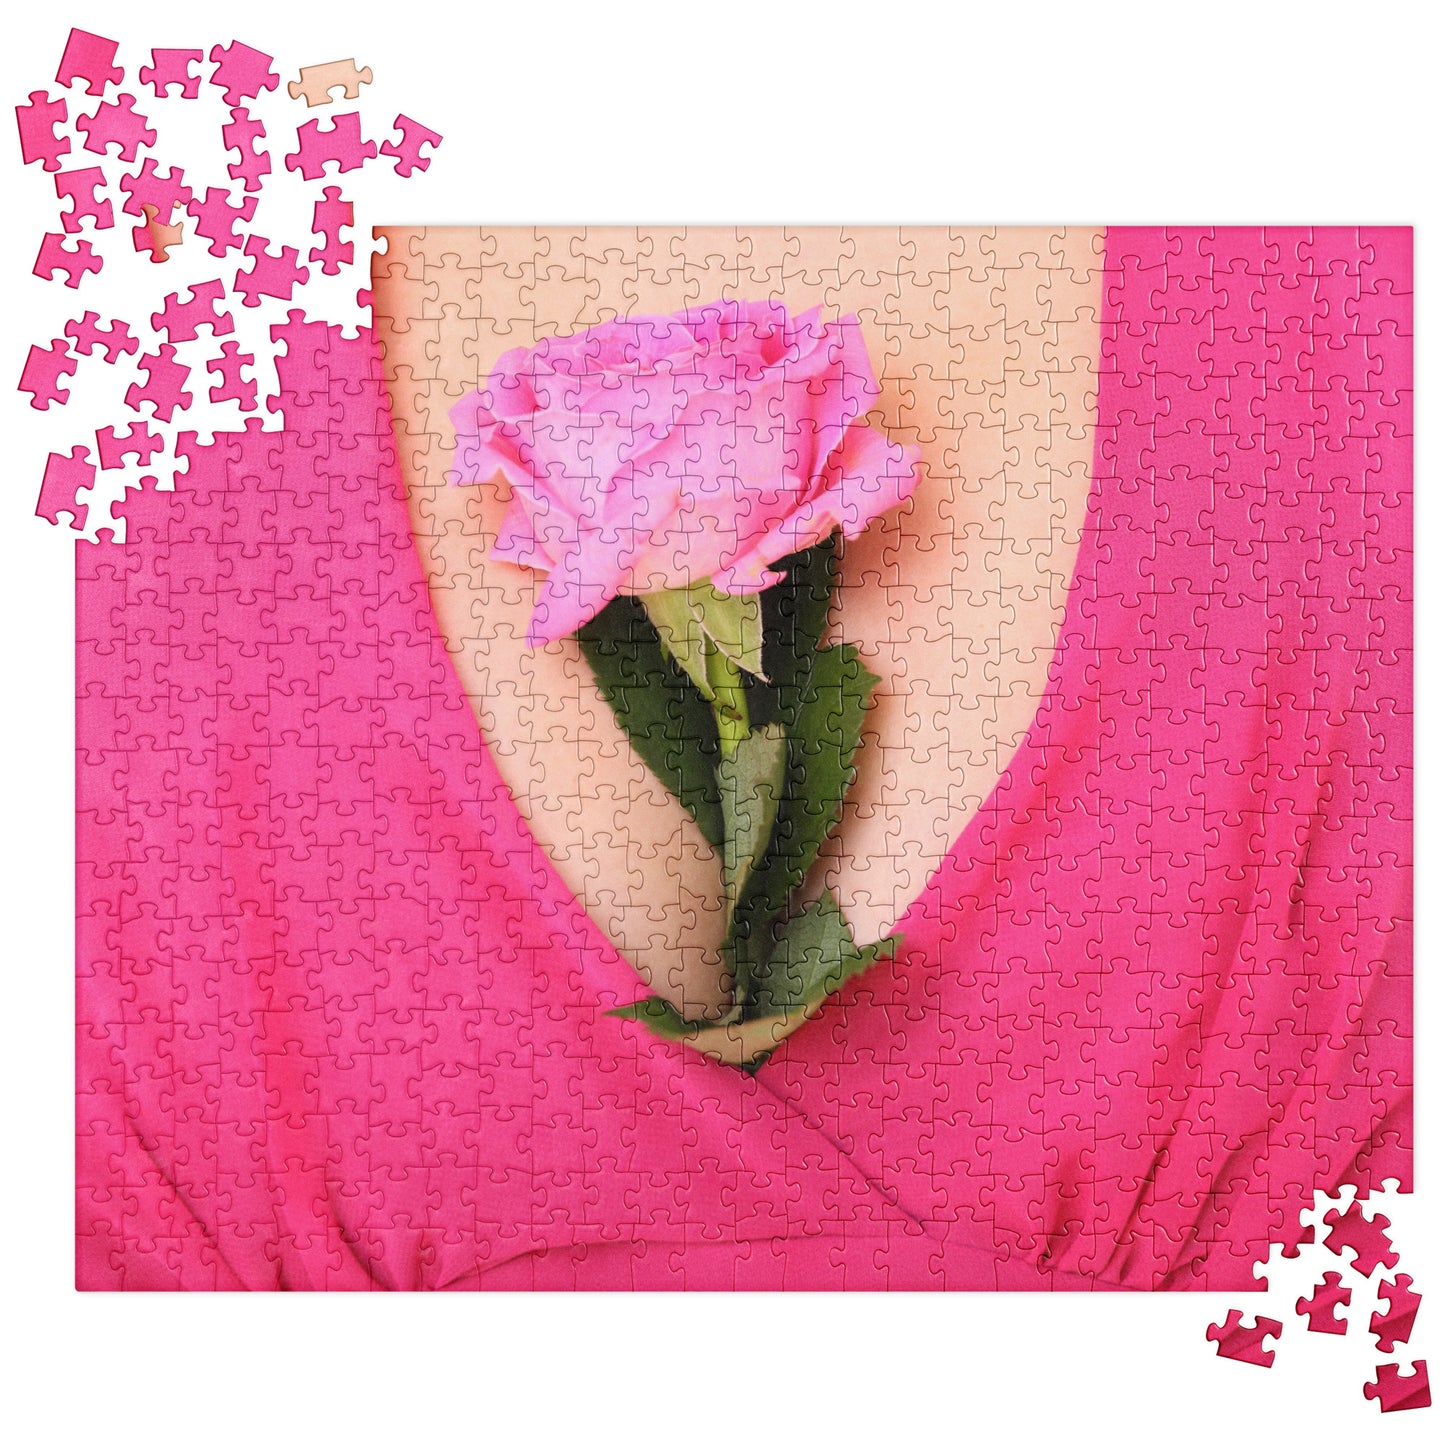 Sensual Jigsaw Puzzle: Breasts with Rose